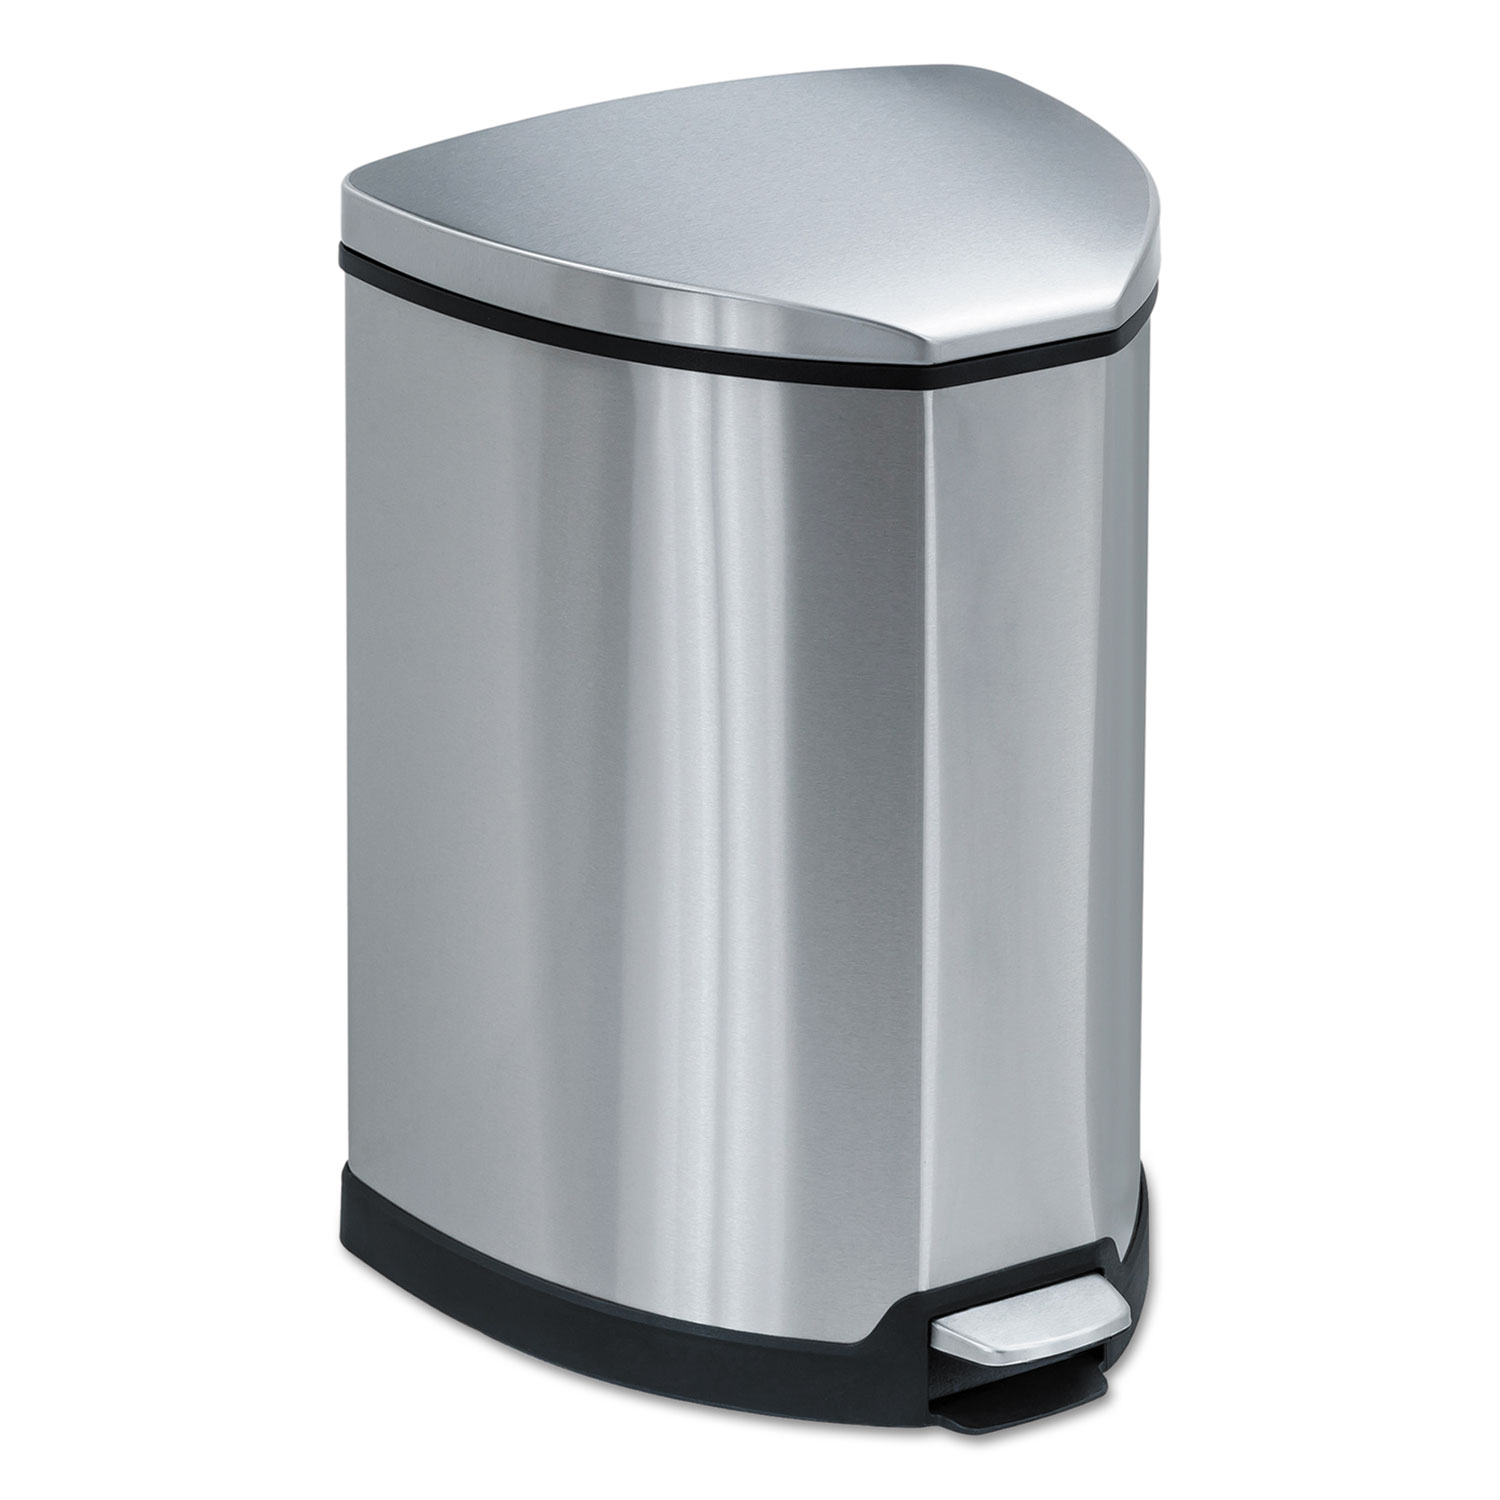  Safco 9685SS Step-On Waste Receptacle, Triangular, Stainless Steel, 4 gal, Chrome/Black (SAF9685SS) 